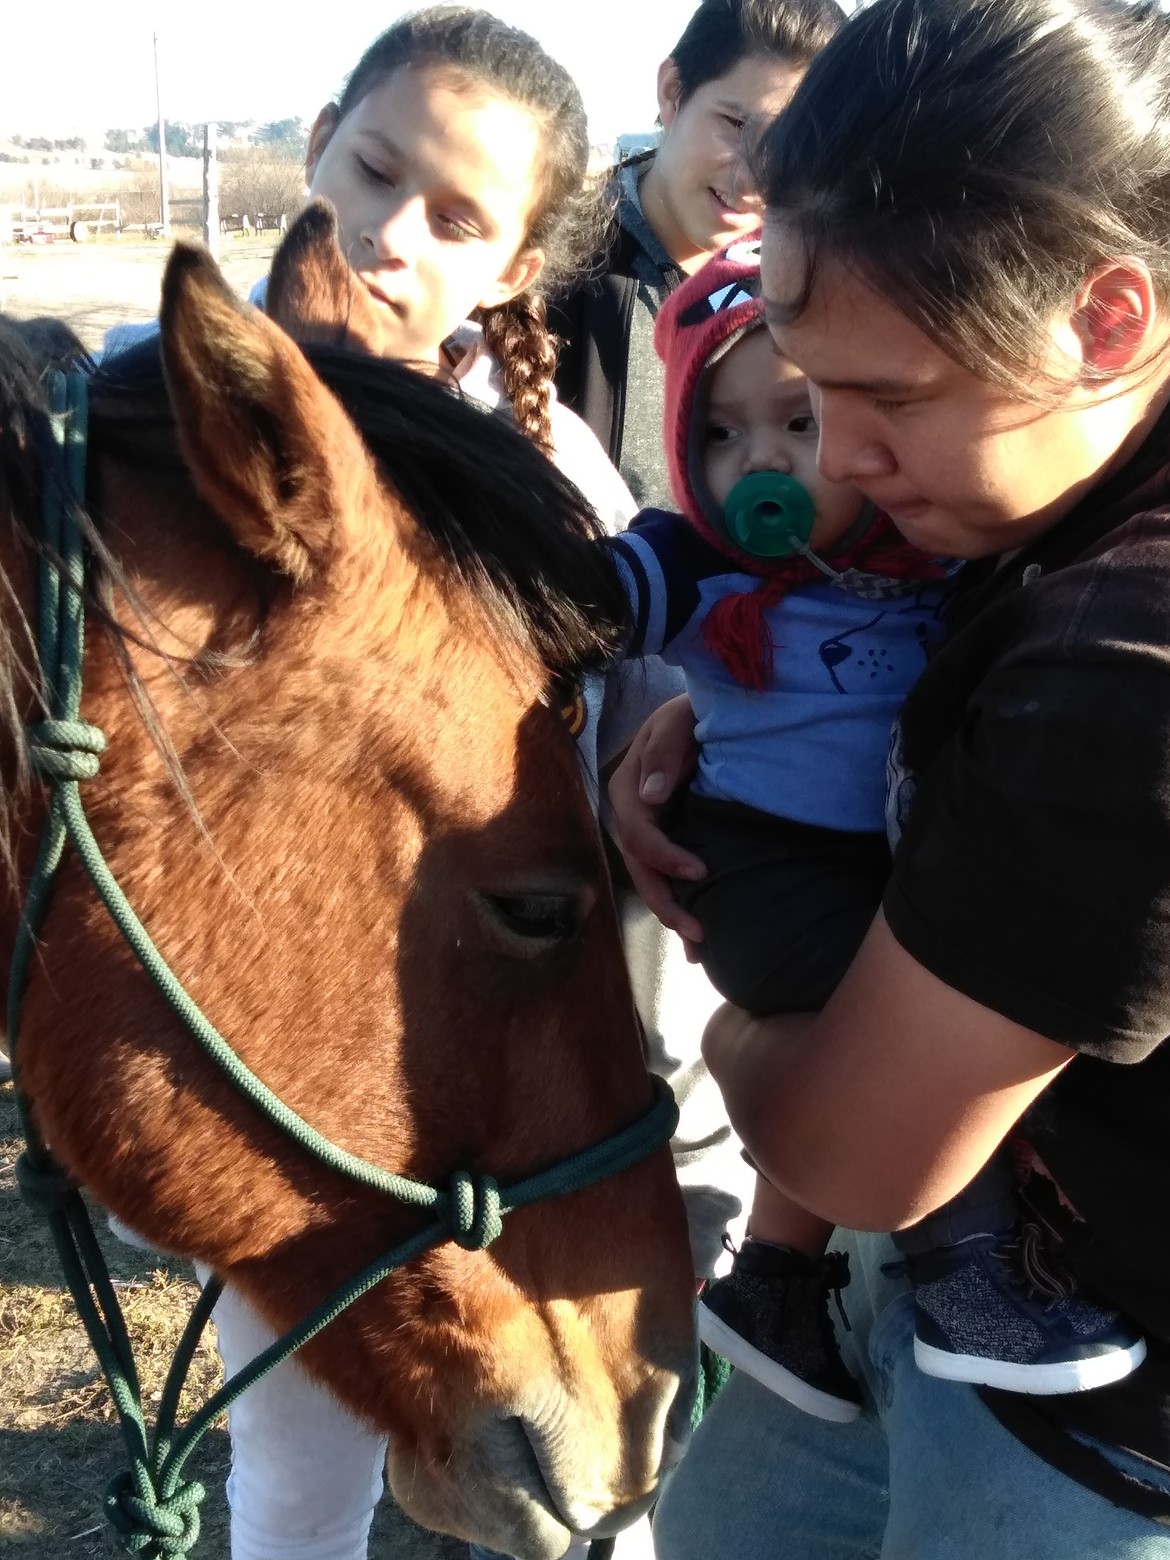 Tatanka intorduces Ronin to horses while Zora helps and MJ looks on.